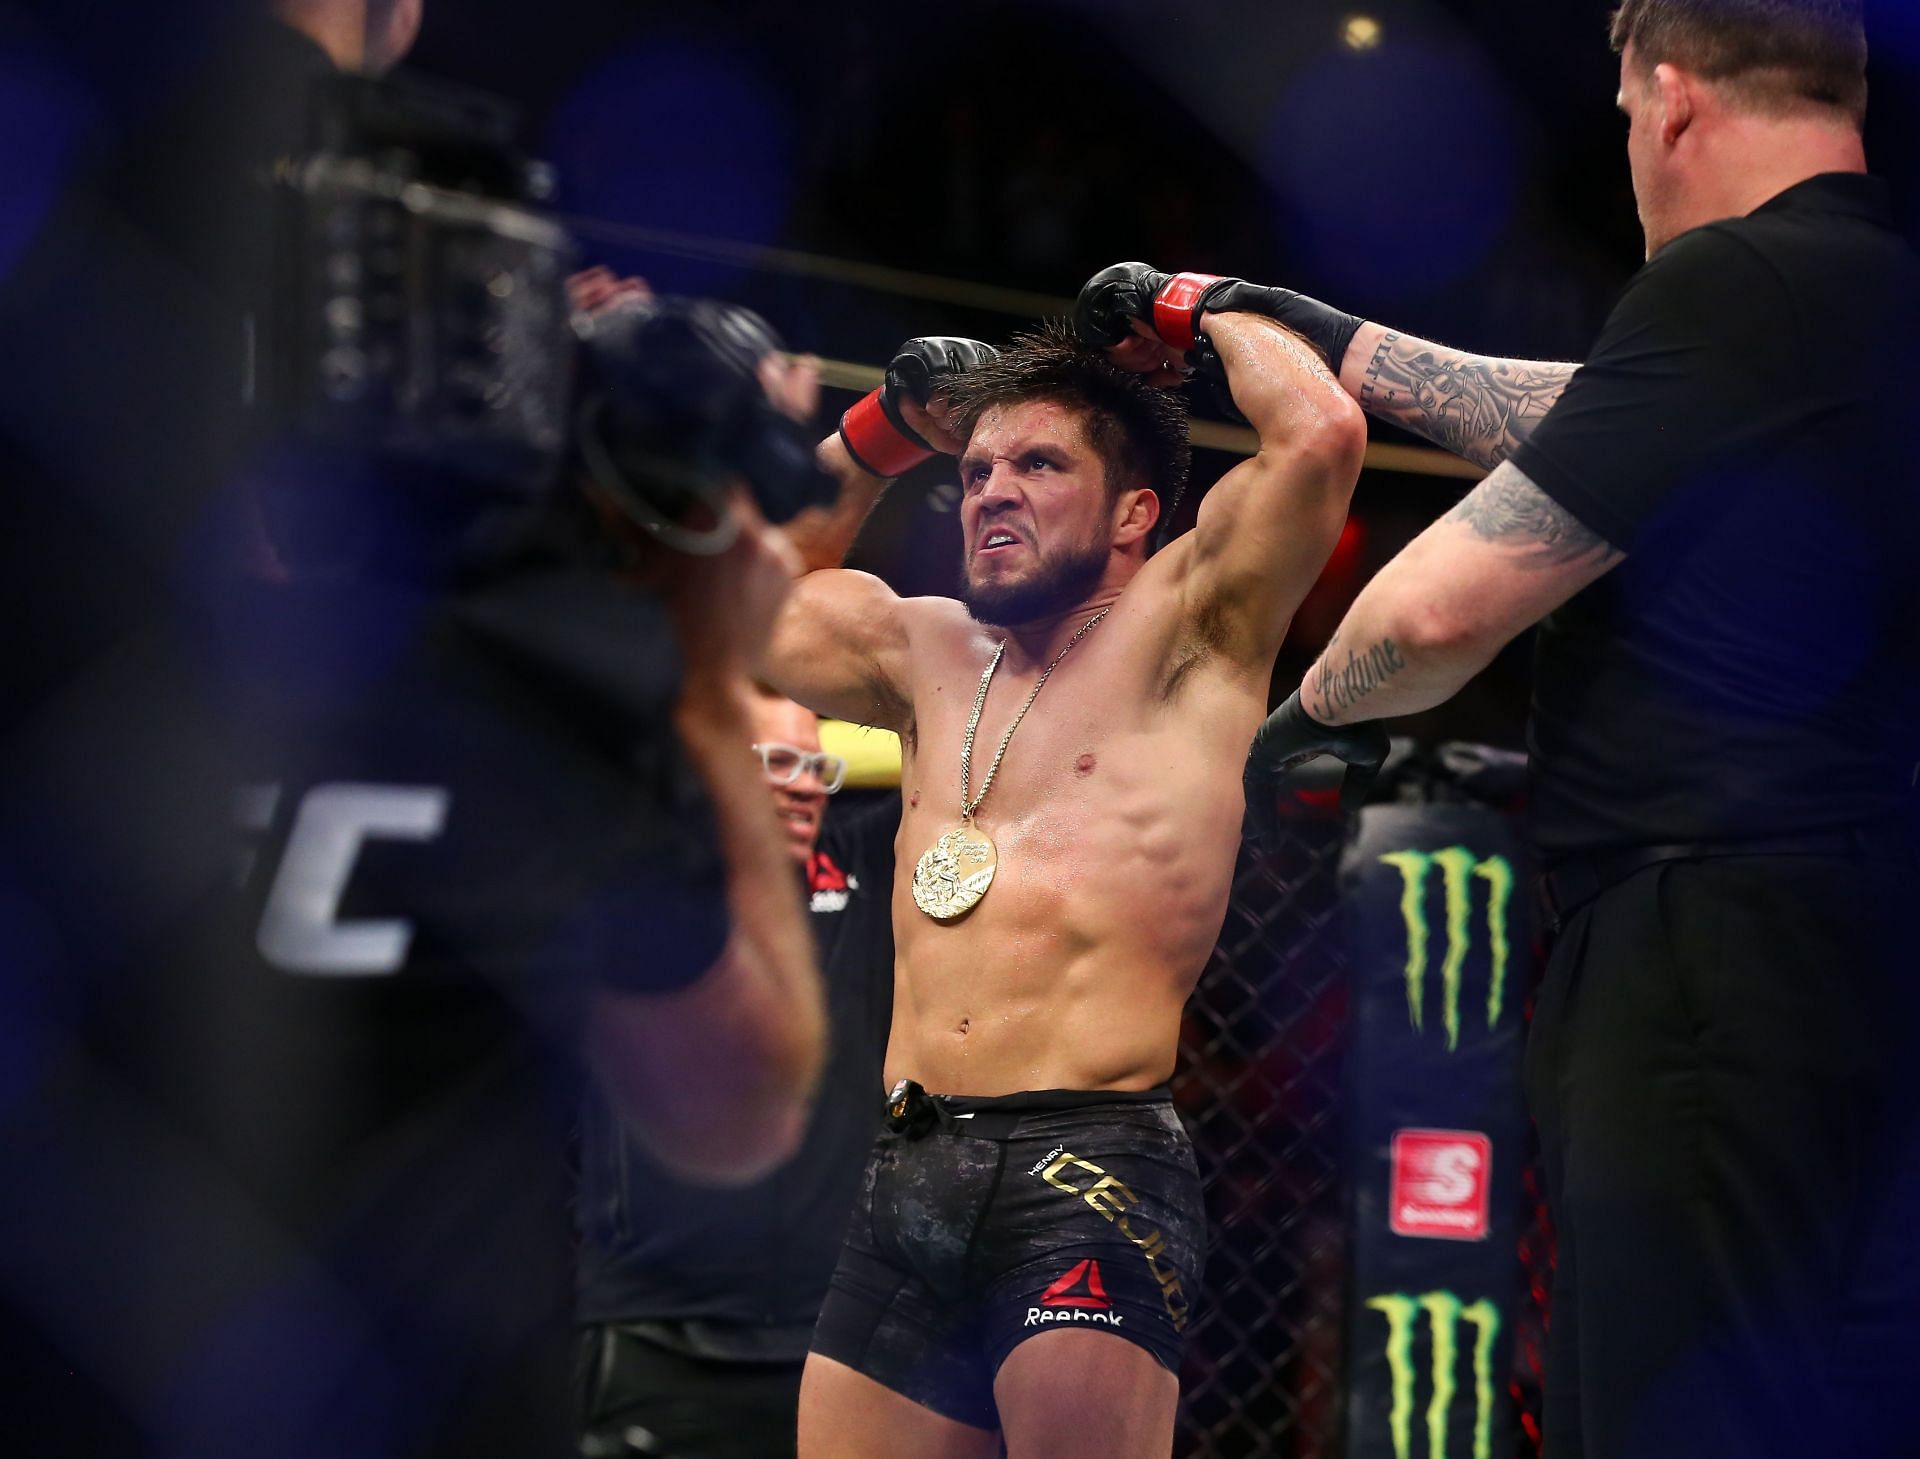 Could we see Cejudo return to the octagon?